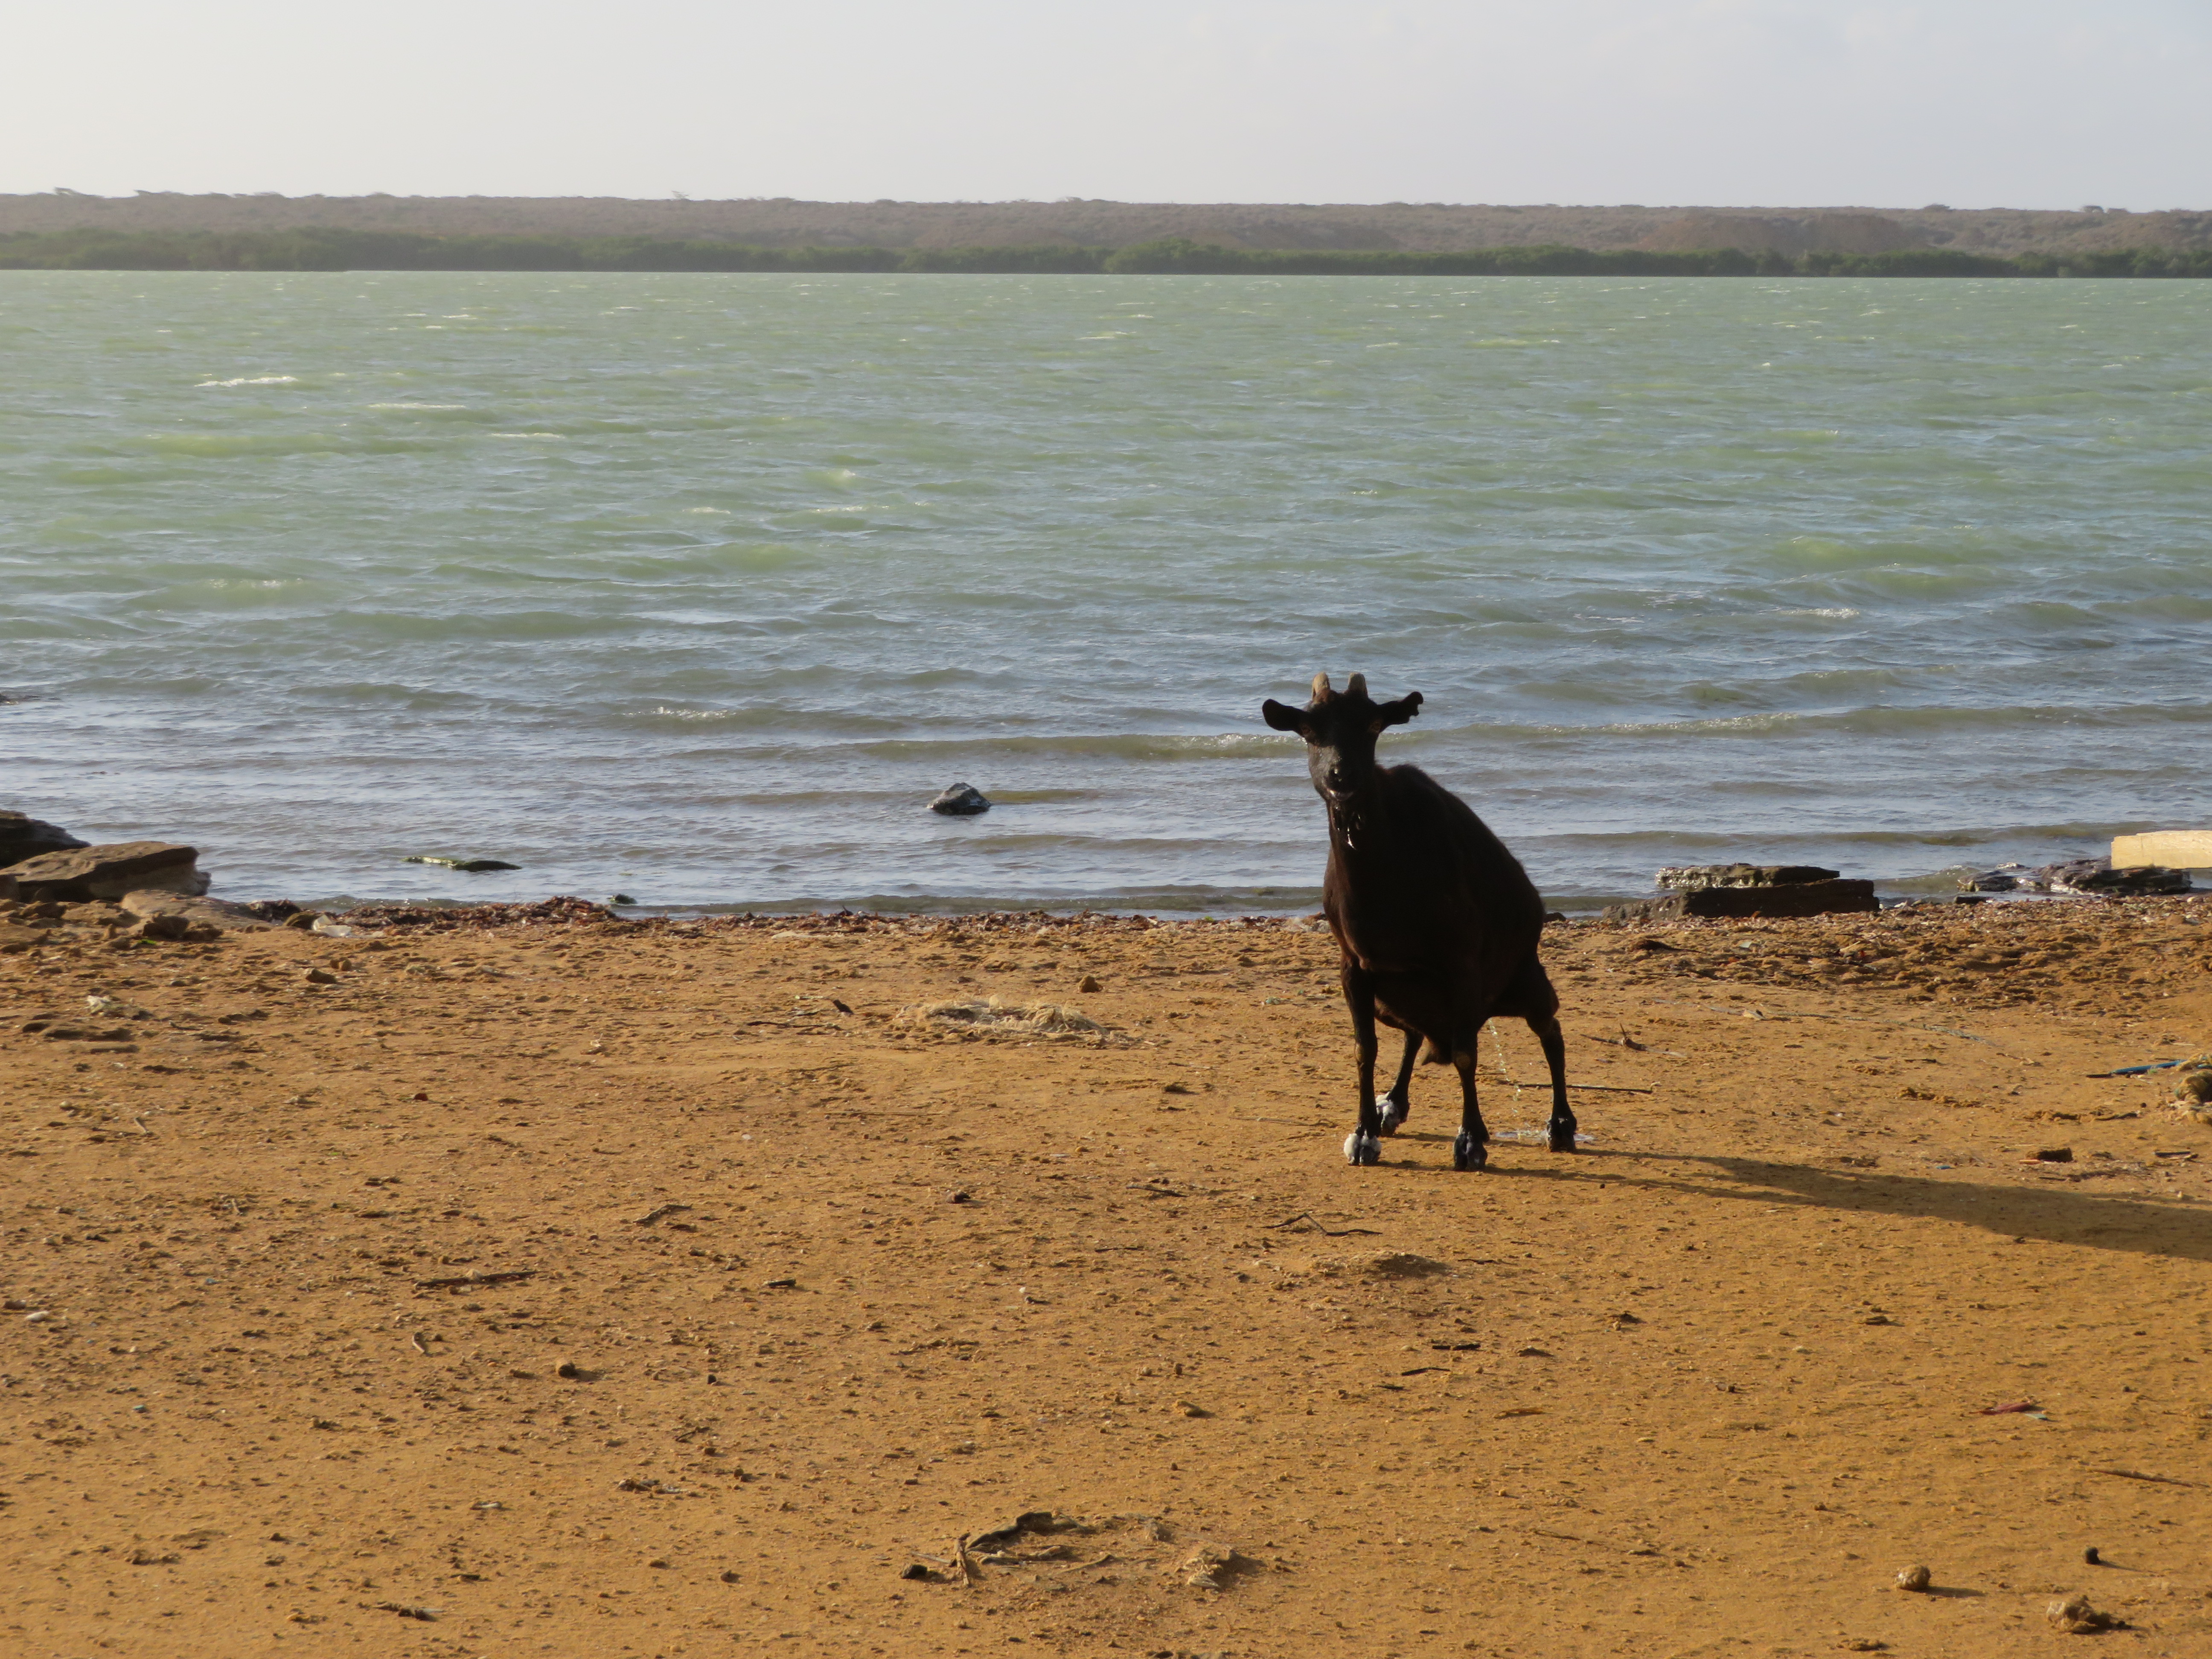 Goat on the beach establishing dominance by showing me it wasn't afraid to pee while looking me in the eye.